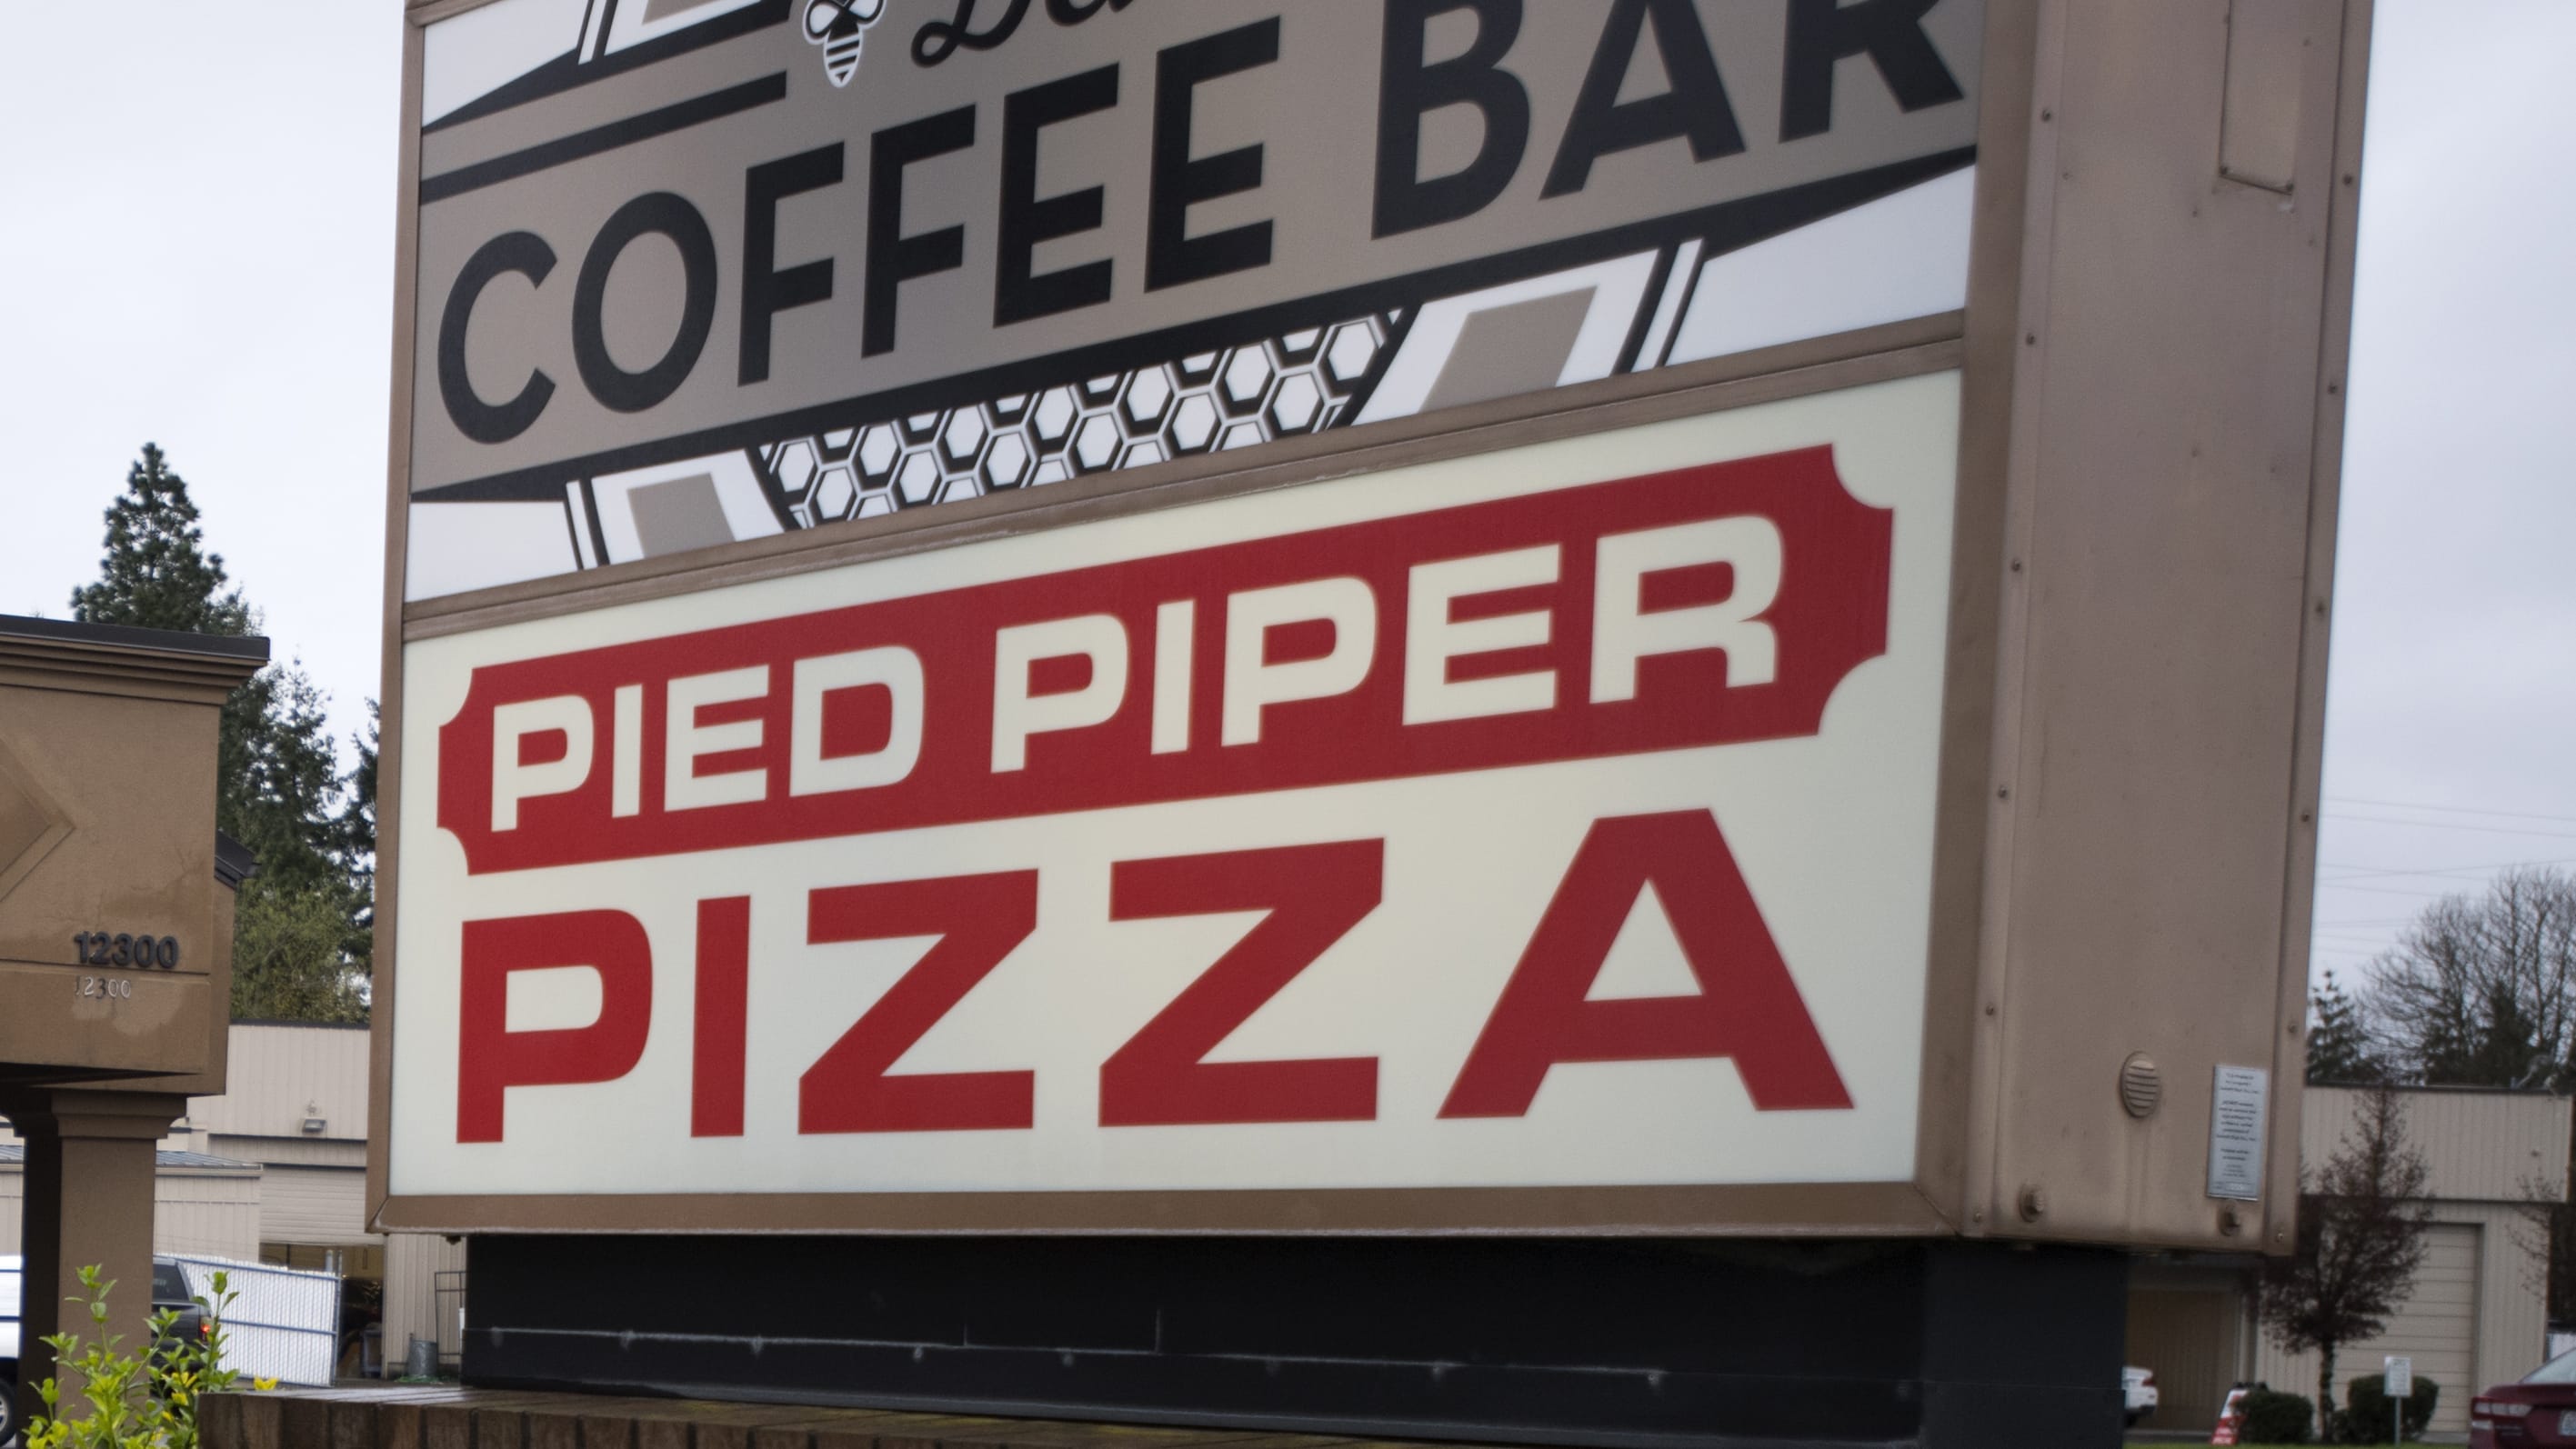 Vancouver fire crews were dispatched 3:18 a.m. to Pied Piper Pizza at 12300 Fourth Plain Boulevard for the report of a commercial structure fire.